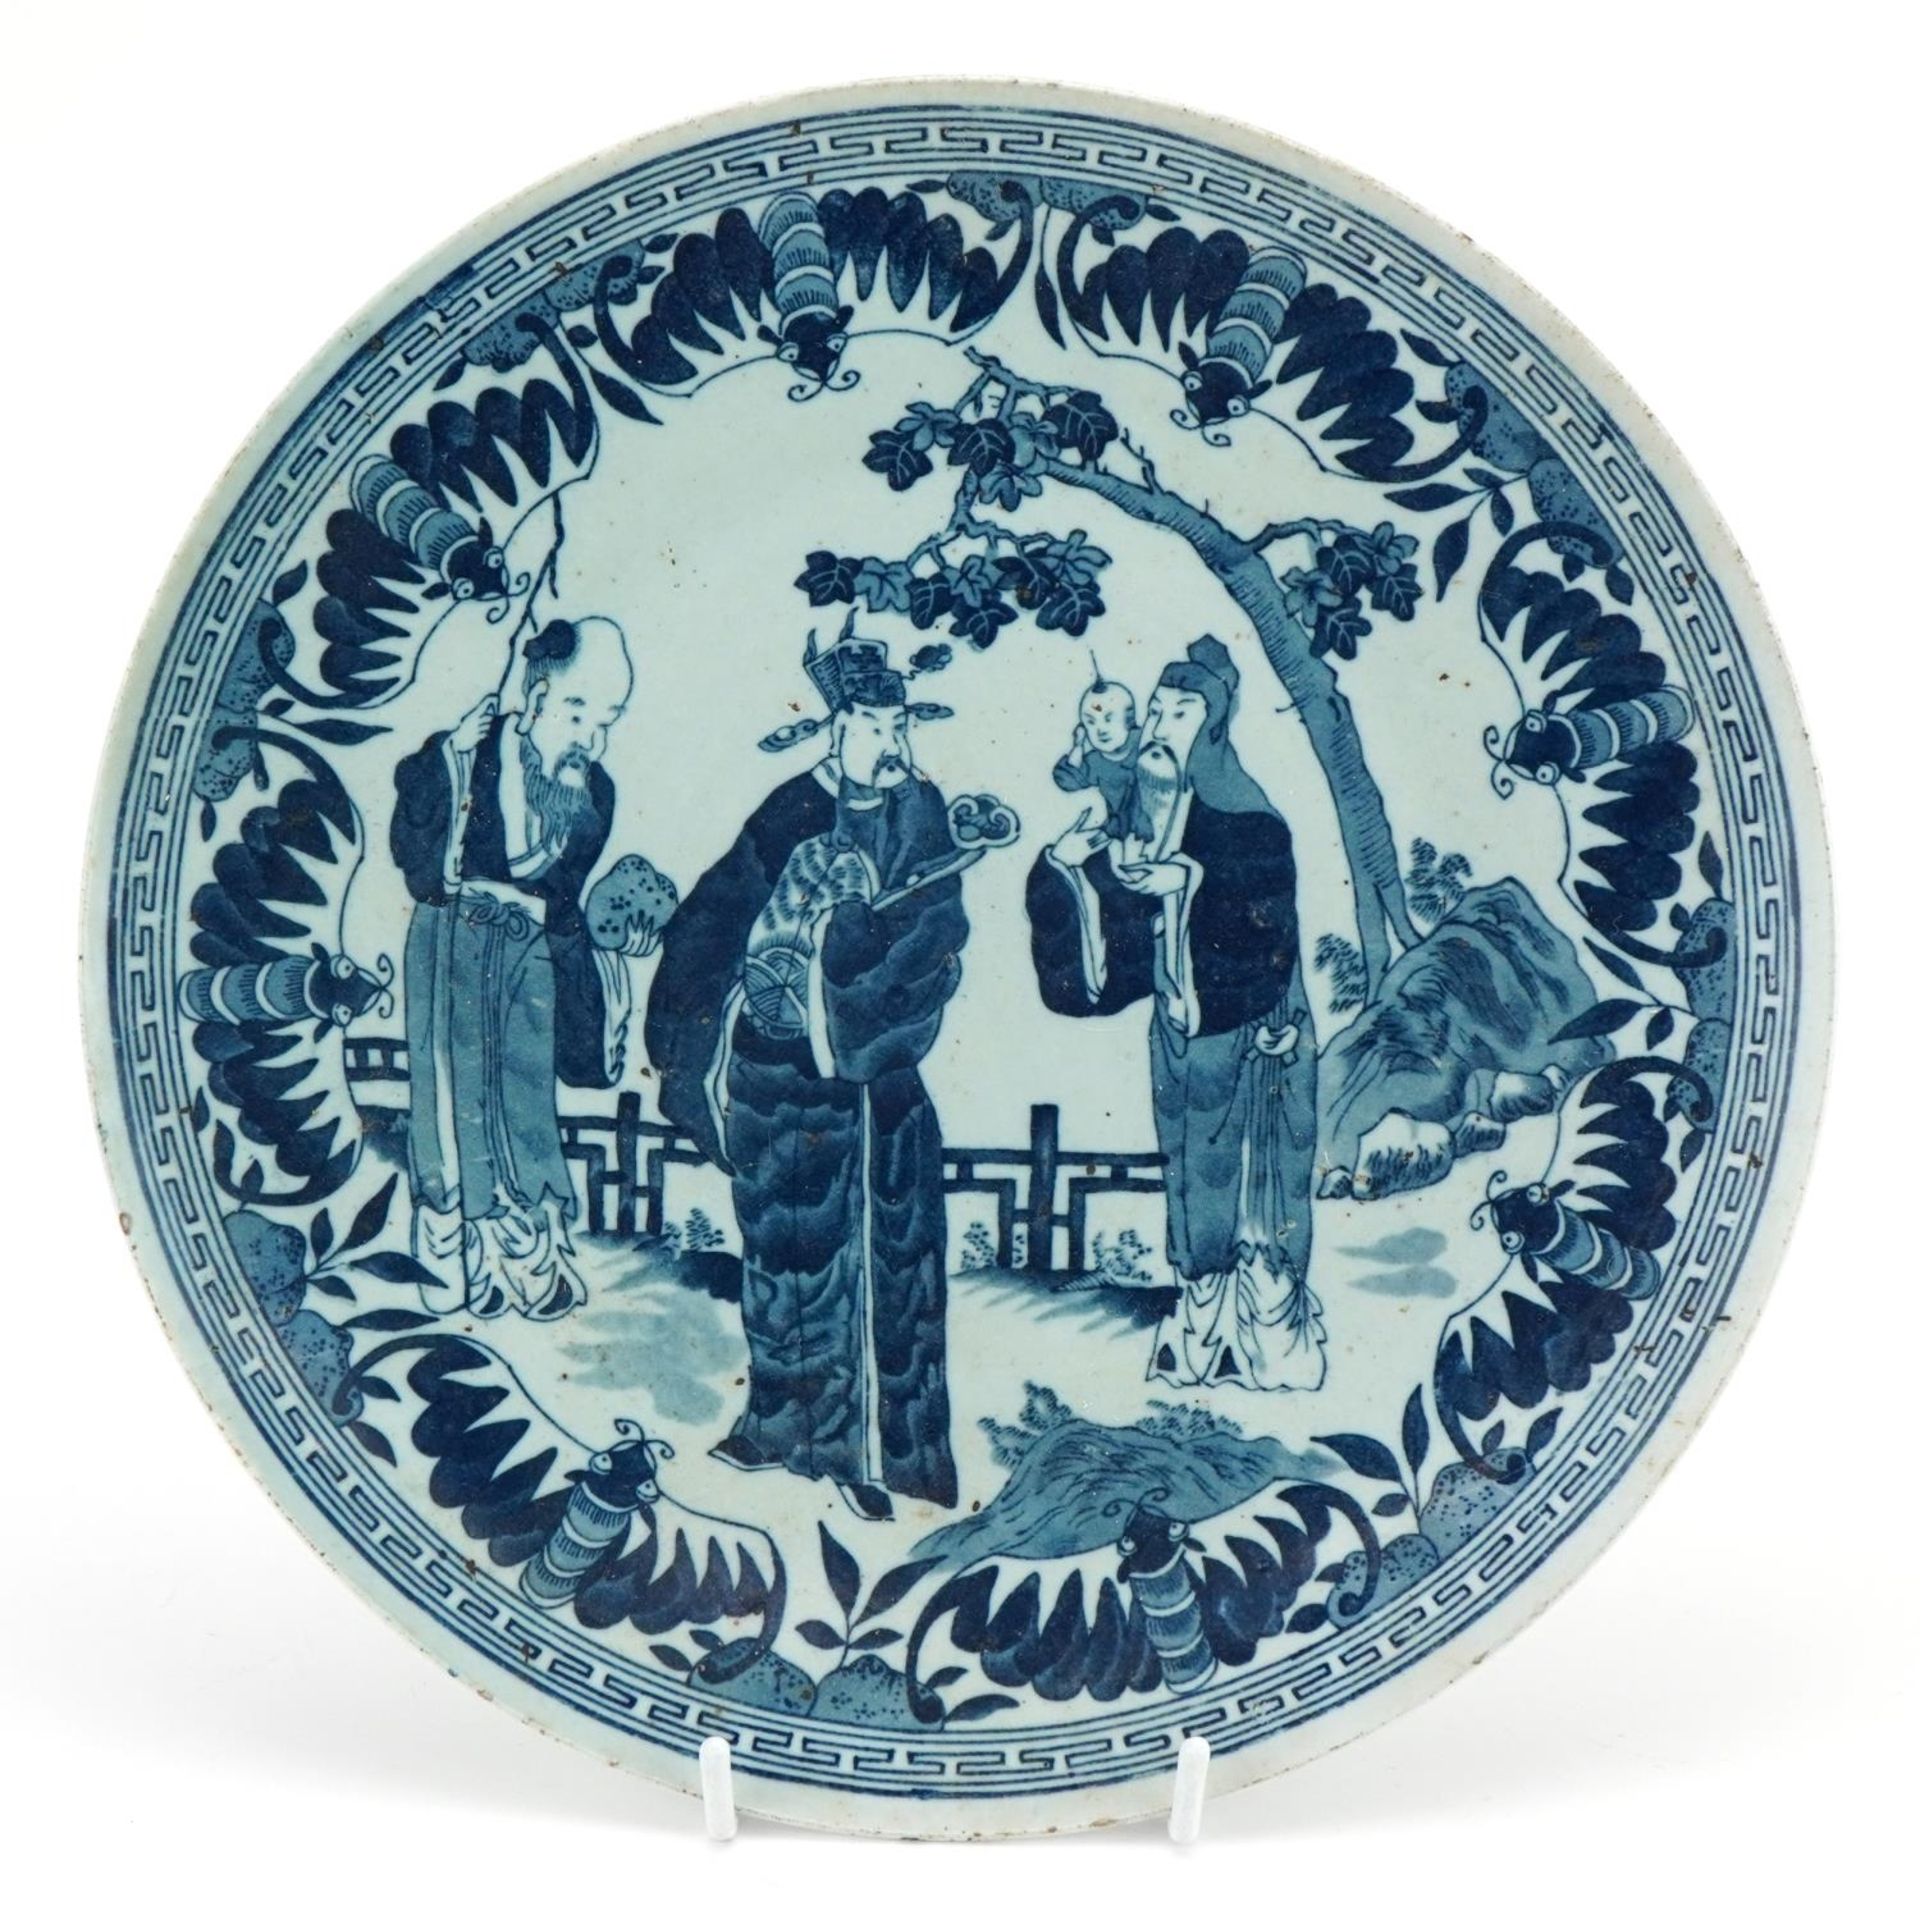 Chinese blue and white porcelain plate decorated with an emporer in a palace setting, 25.5cm in